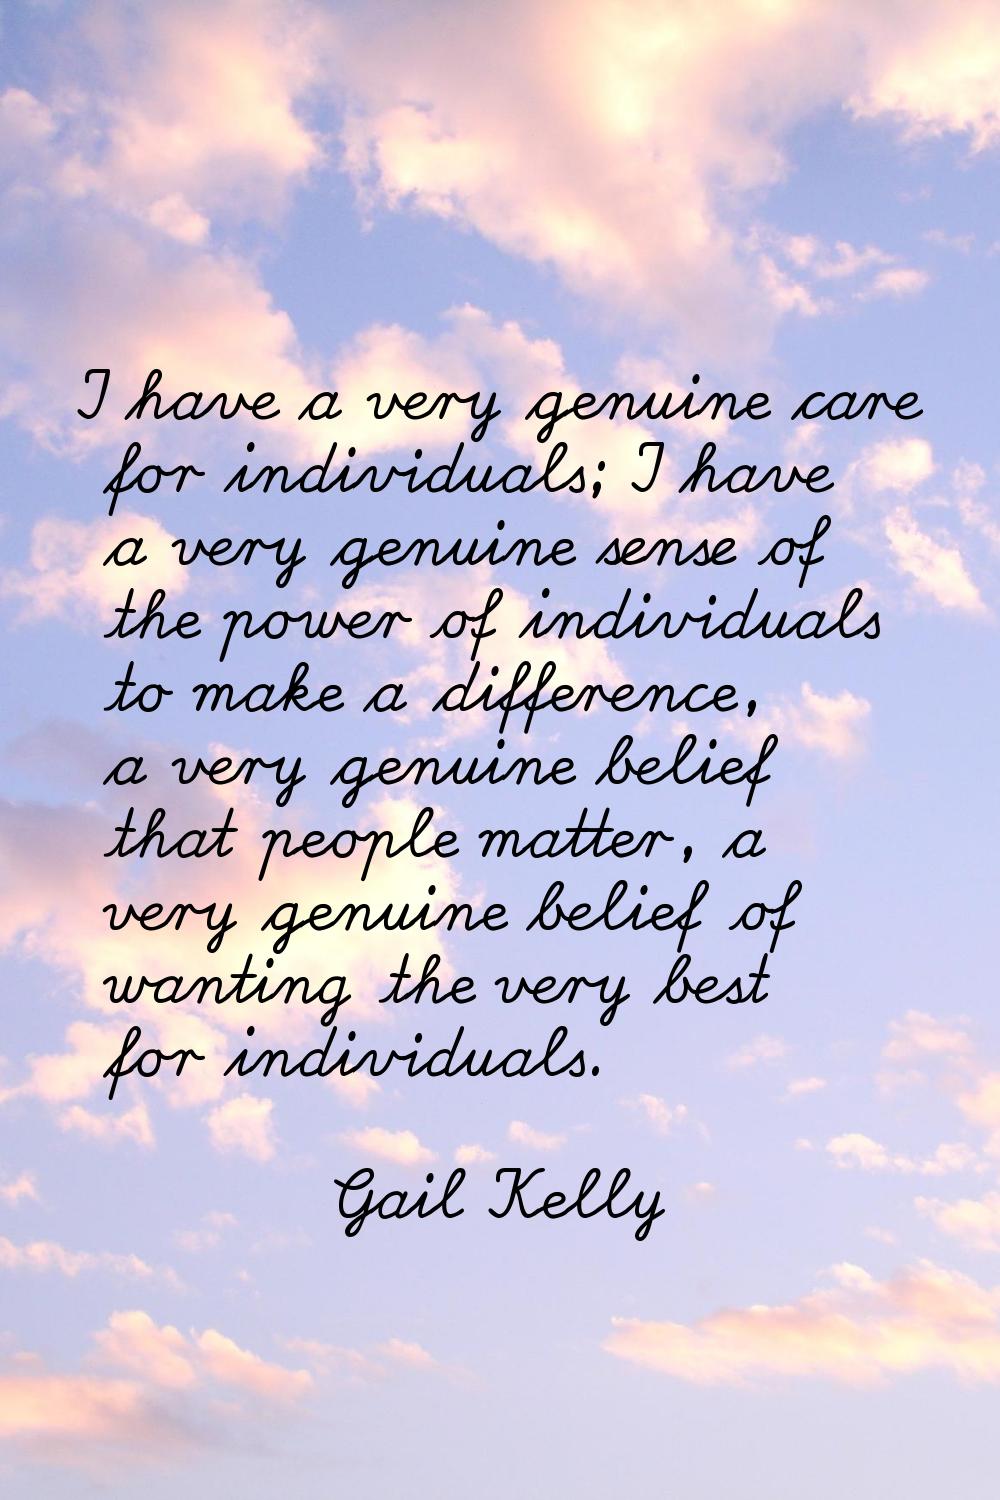 I have a very genuine care for individuals; I have a very genuine sense of the power of individuals